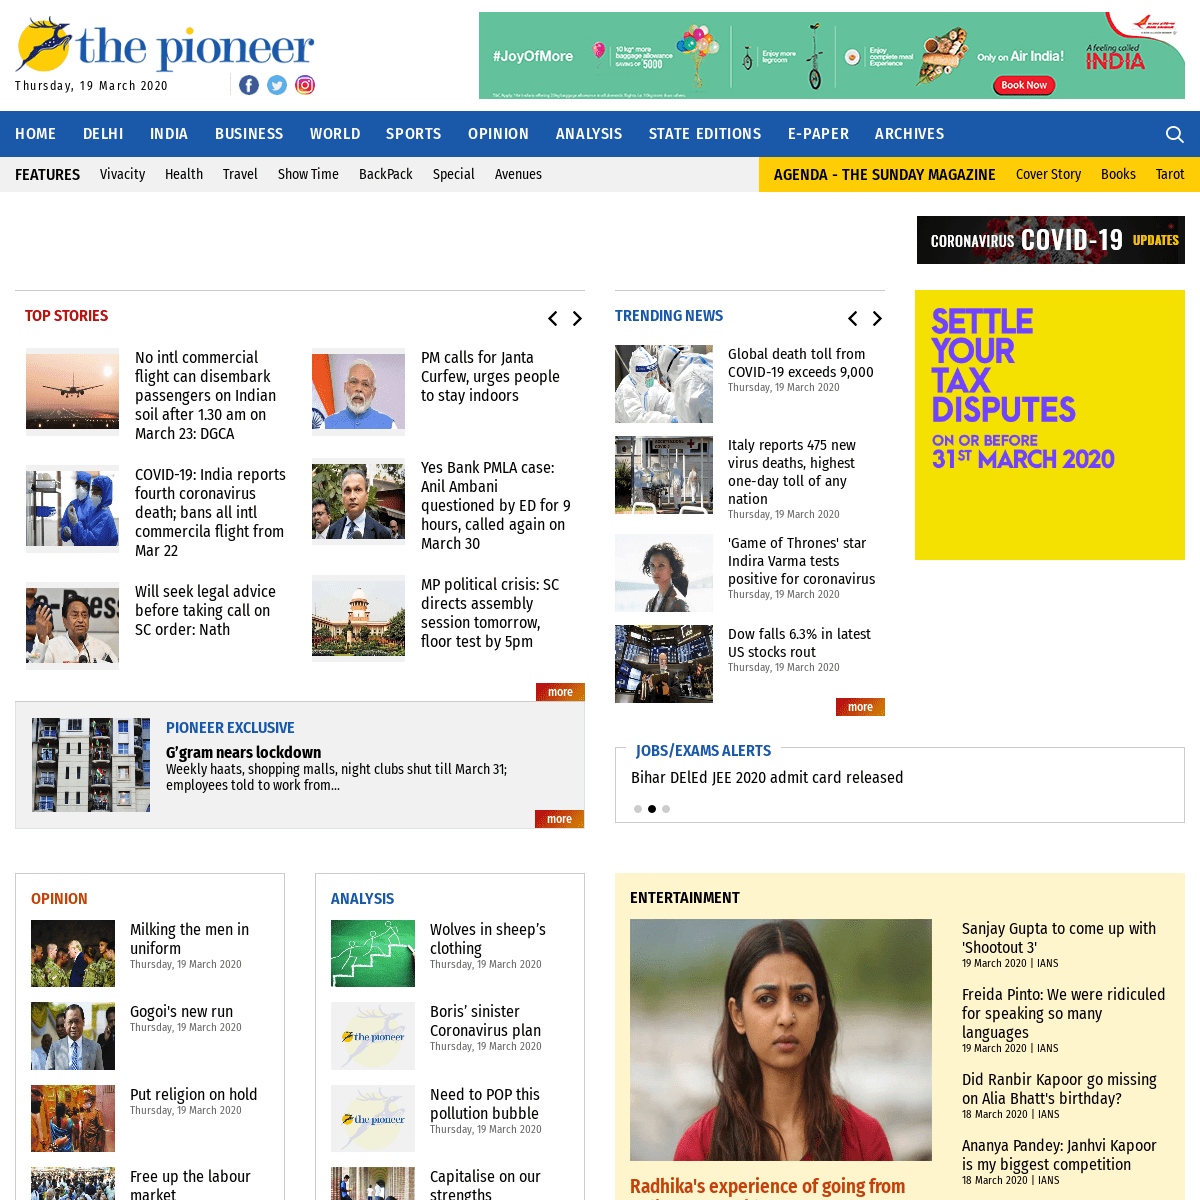 A complete backup of dailypioneer.com